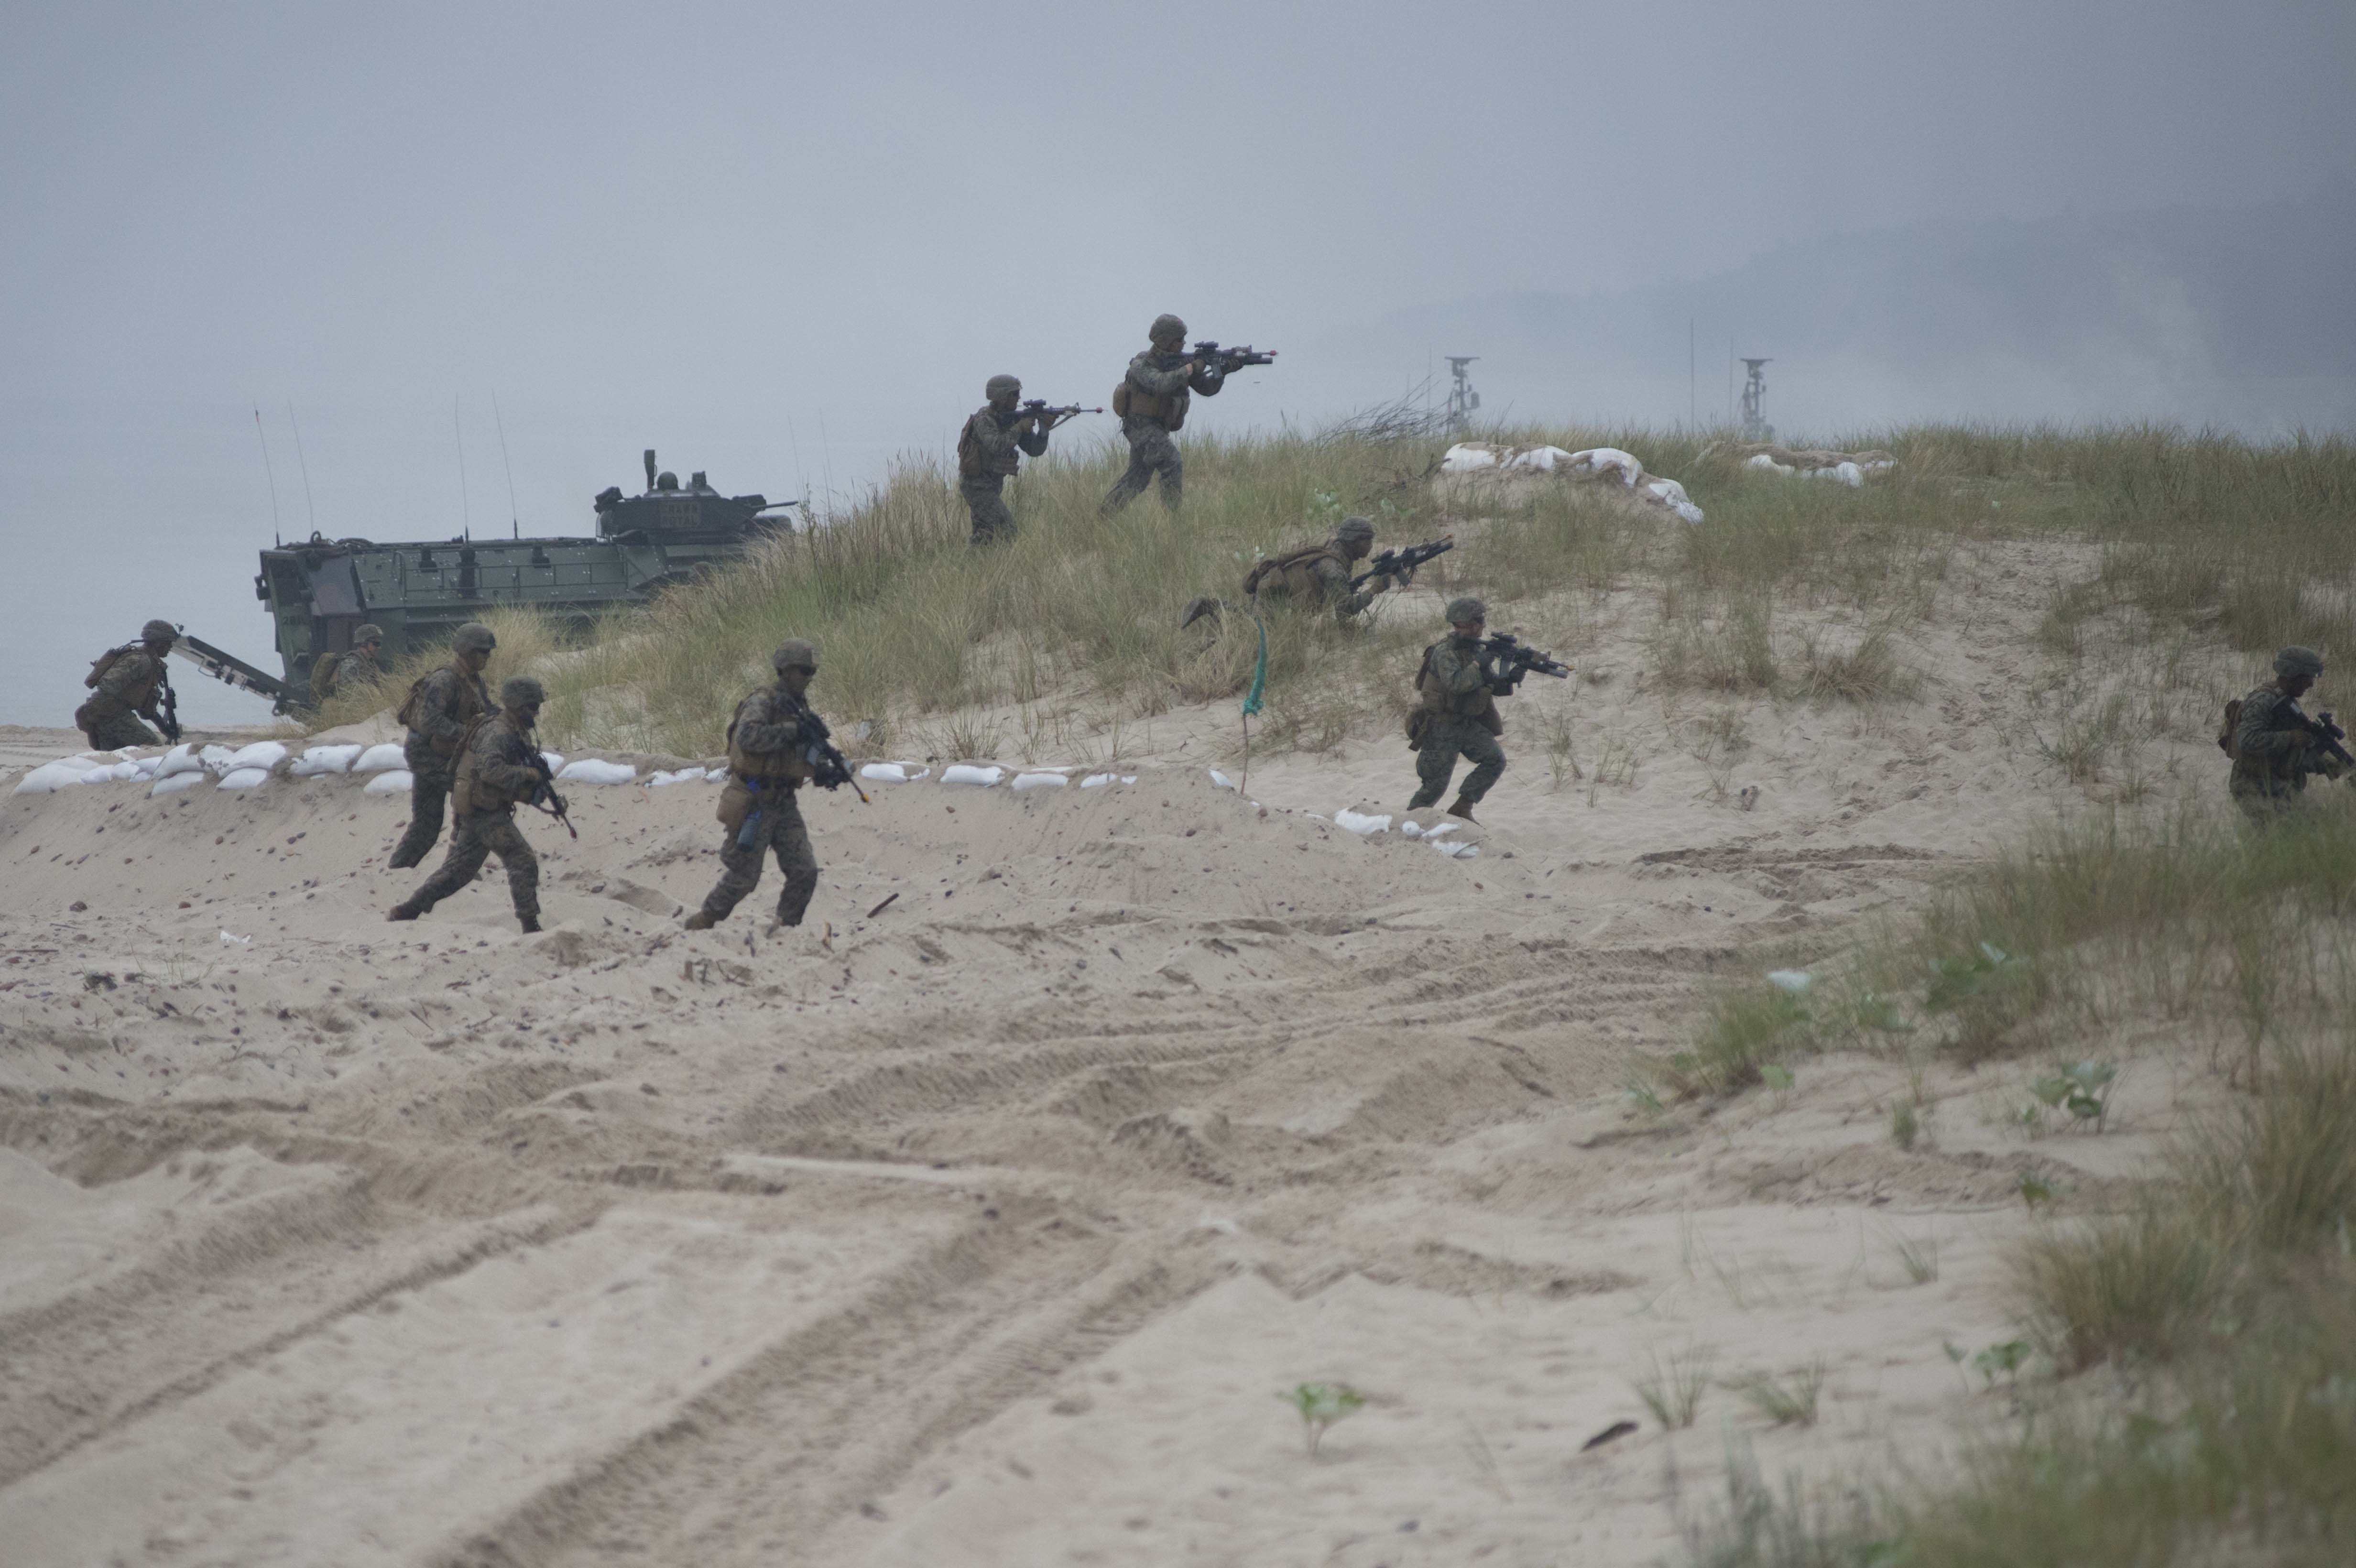 U.S. Marines from India Company, 3rd Battalion, 8th Marine Regiment participate in an amphibious landing exercise in Ustka, Poland, during BALTOPS 2016. US Navy photo.